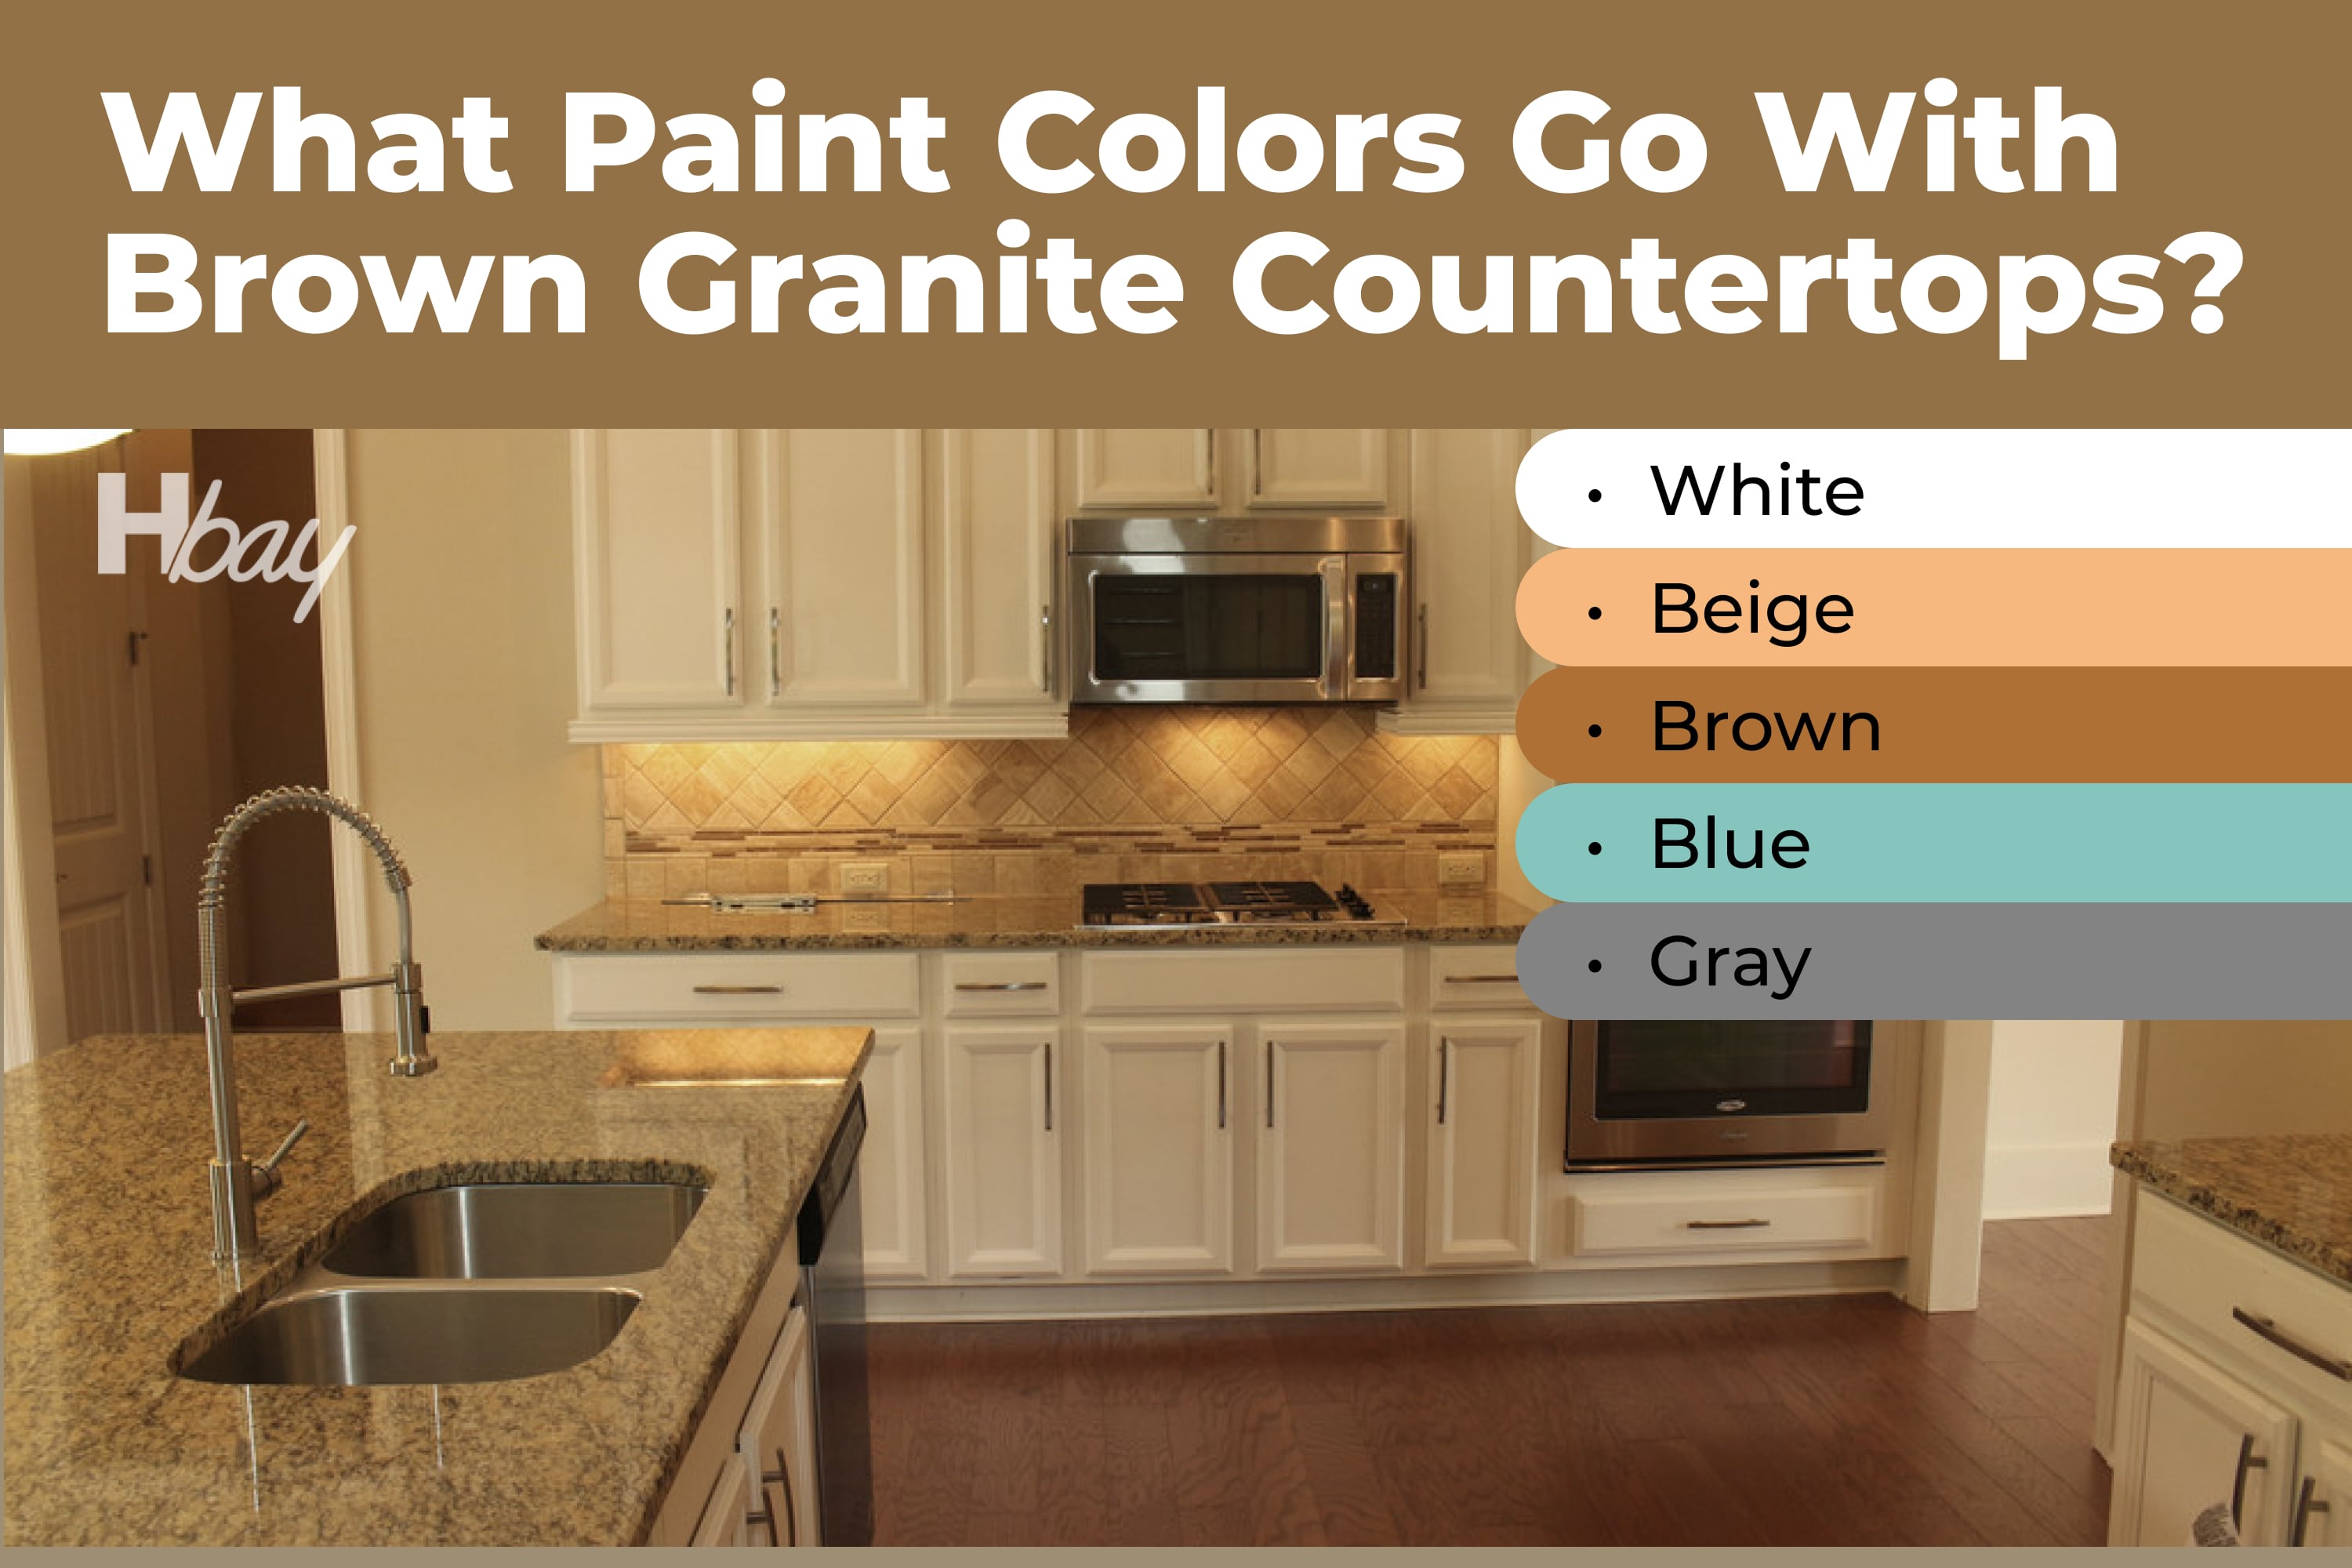 What Paint Colors Go With Brown Granite Countertops